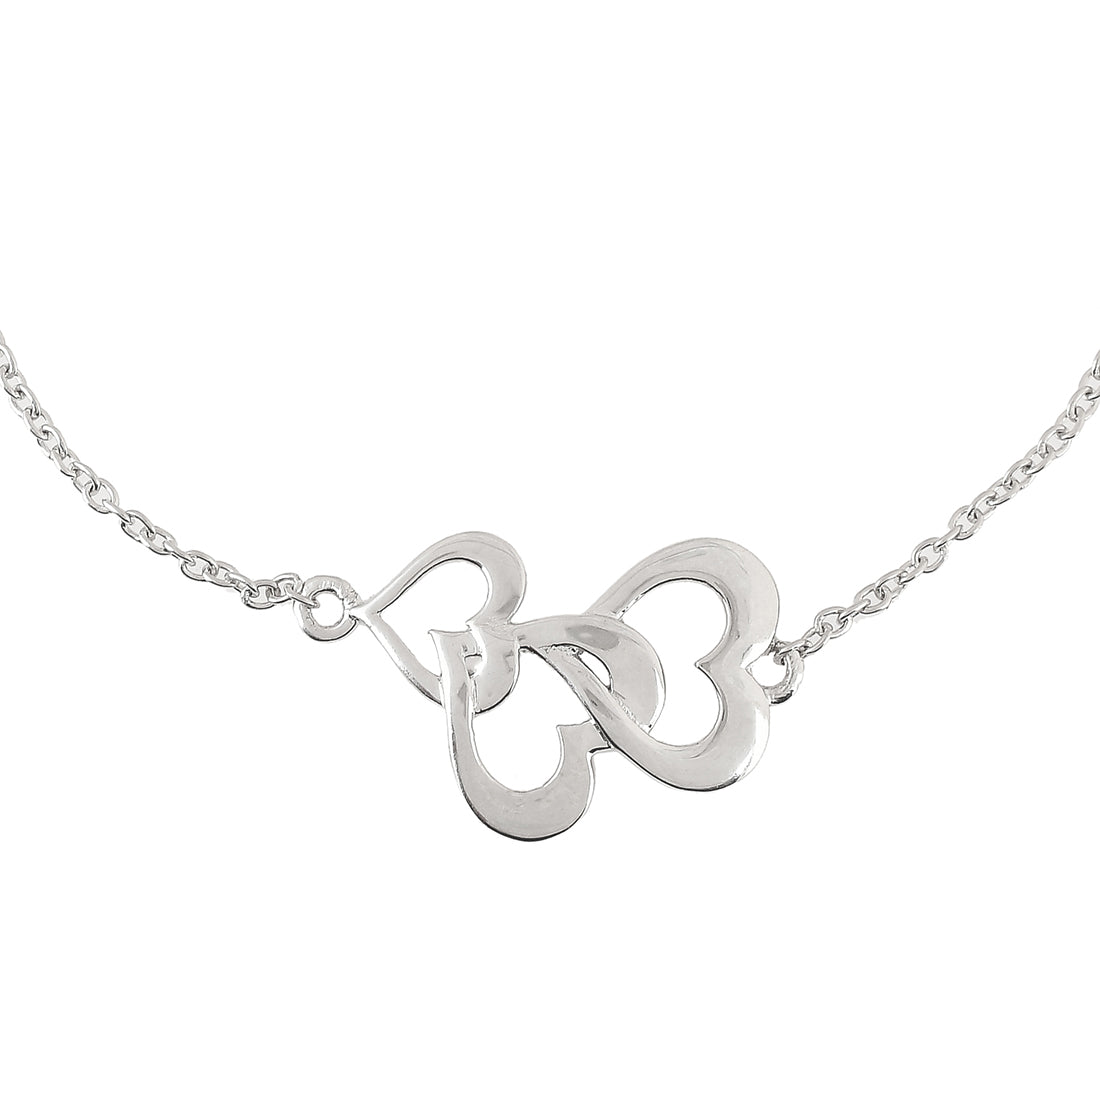 Create Your Own - Heart Initial Necklace - The Perfect Keepsake Gift